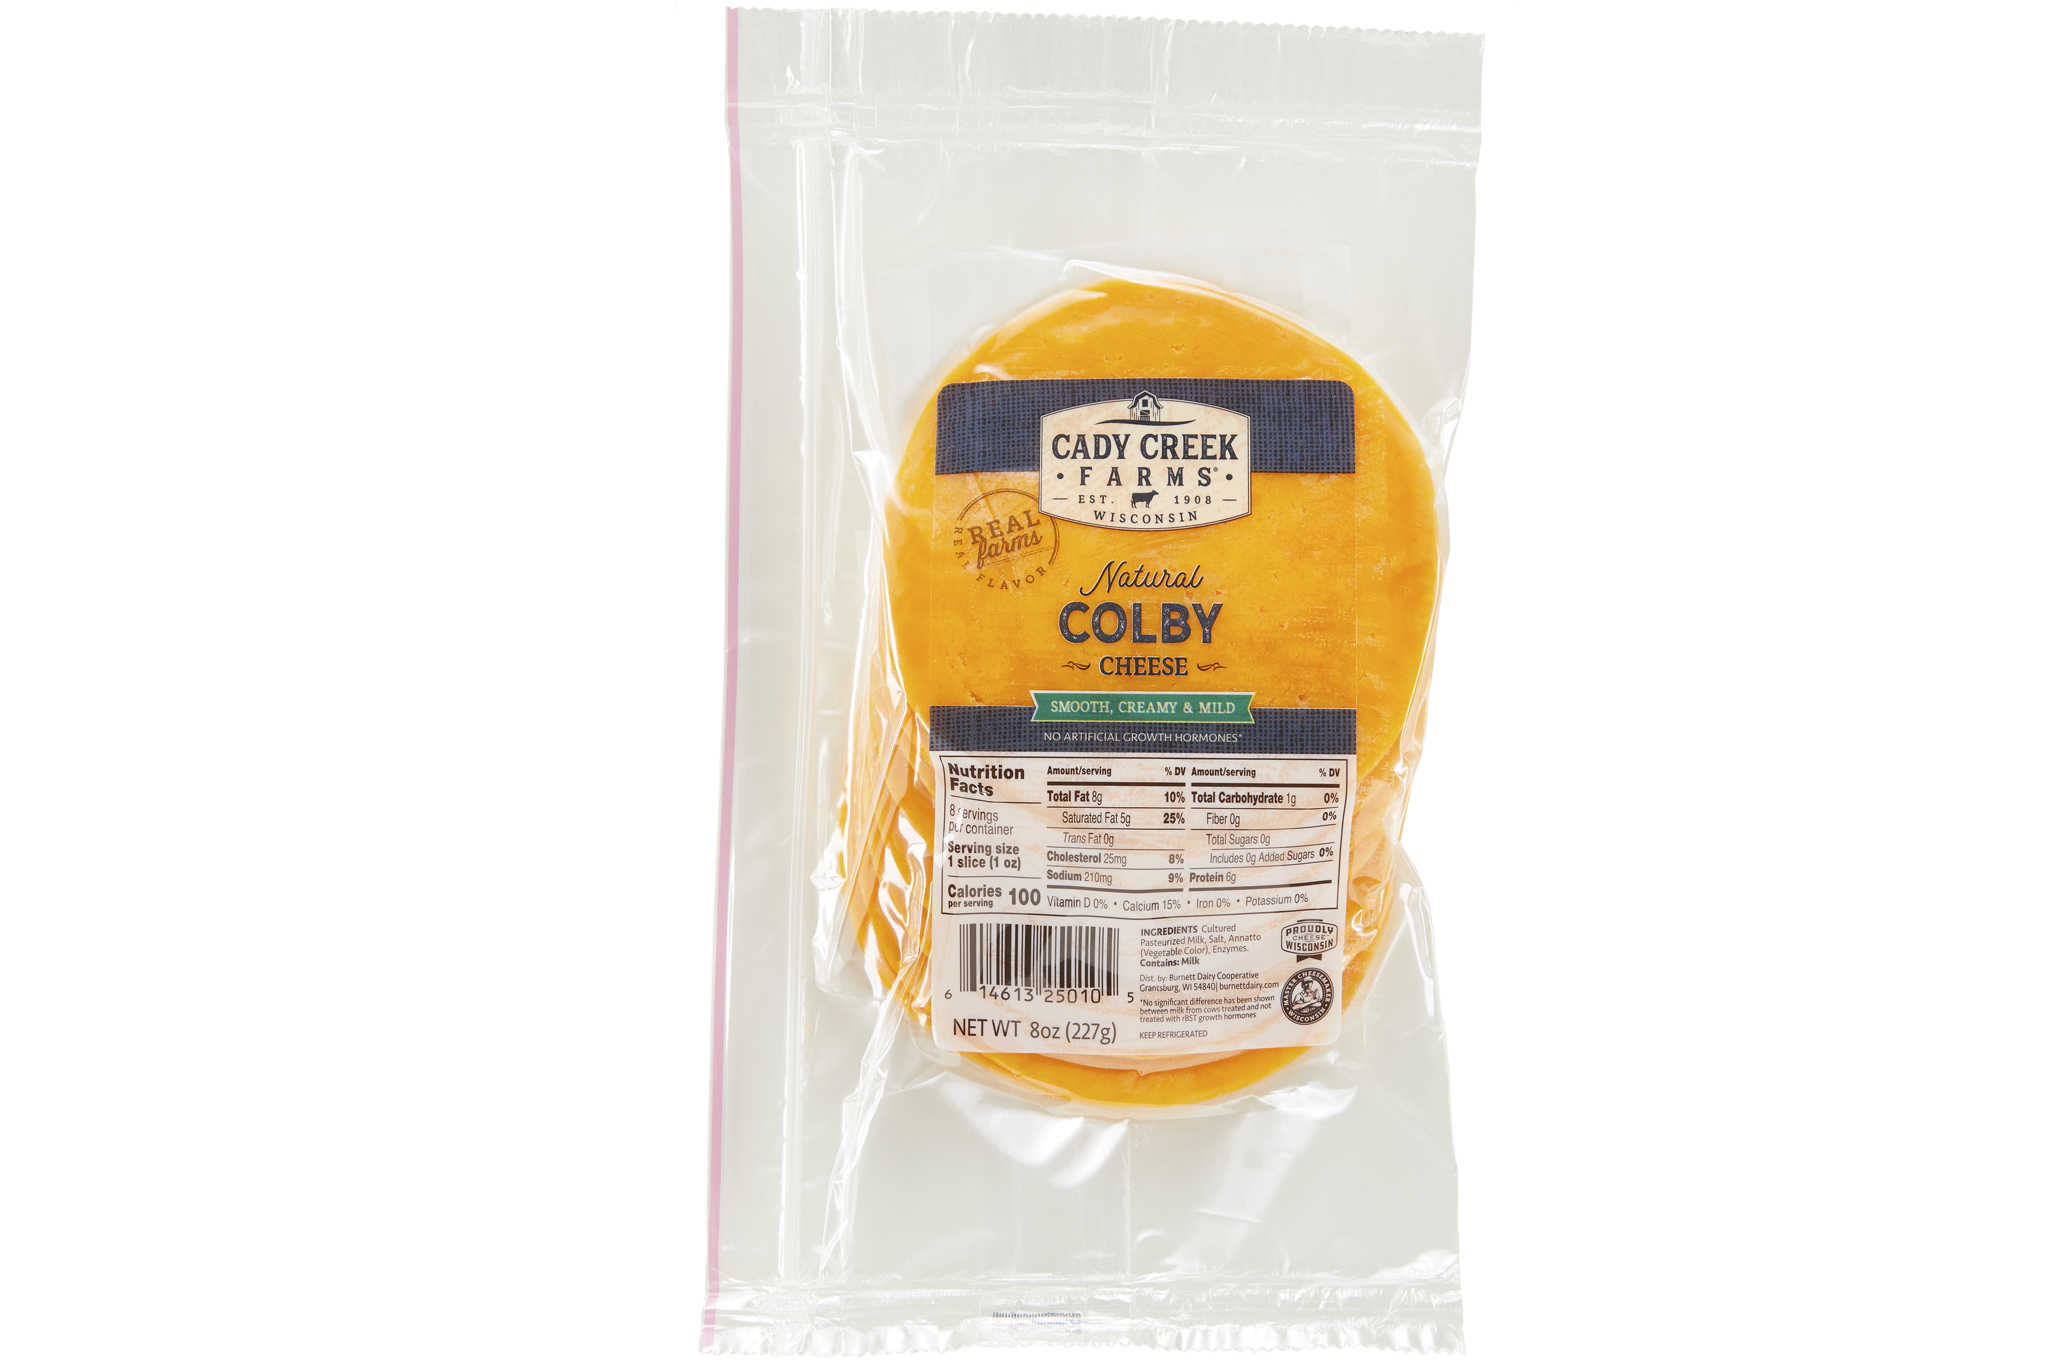 Cady Creek Farms Colby 8 oz front package slices